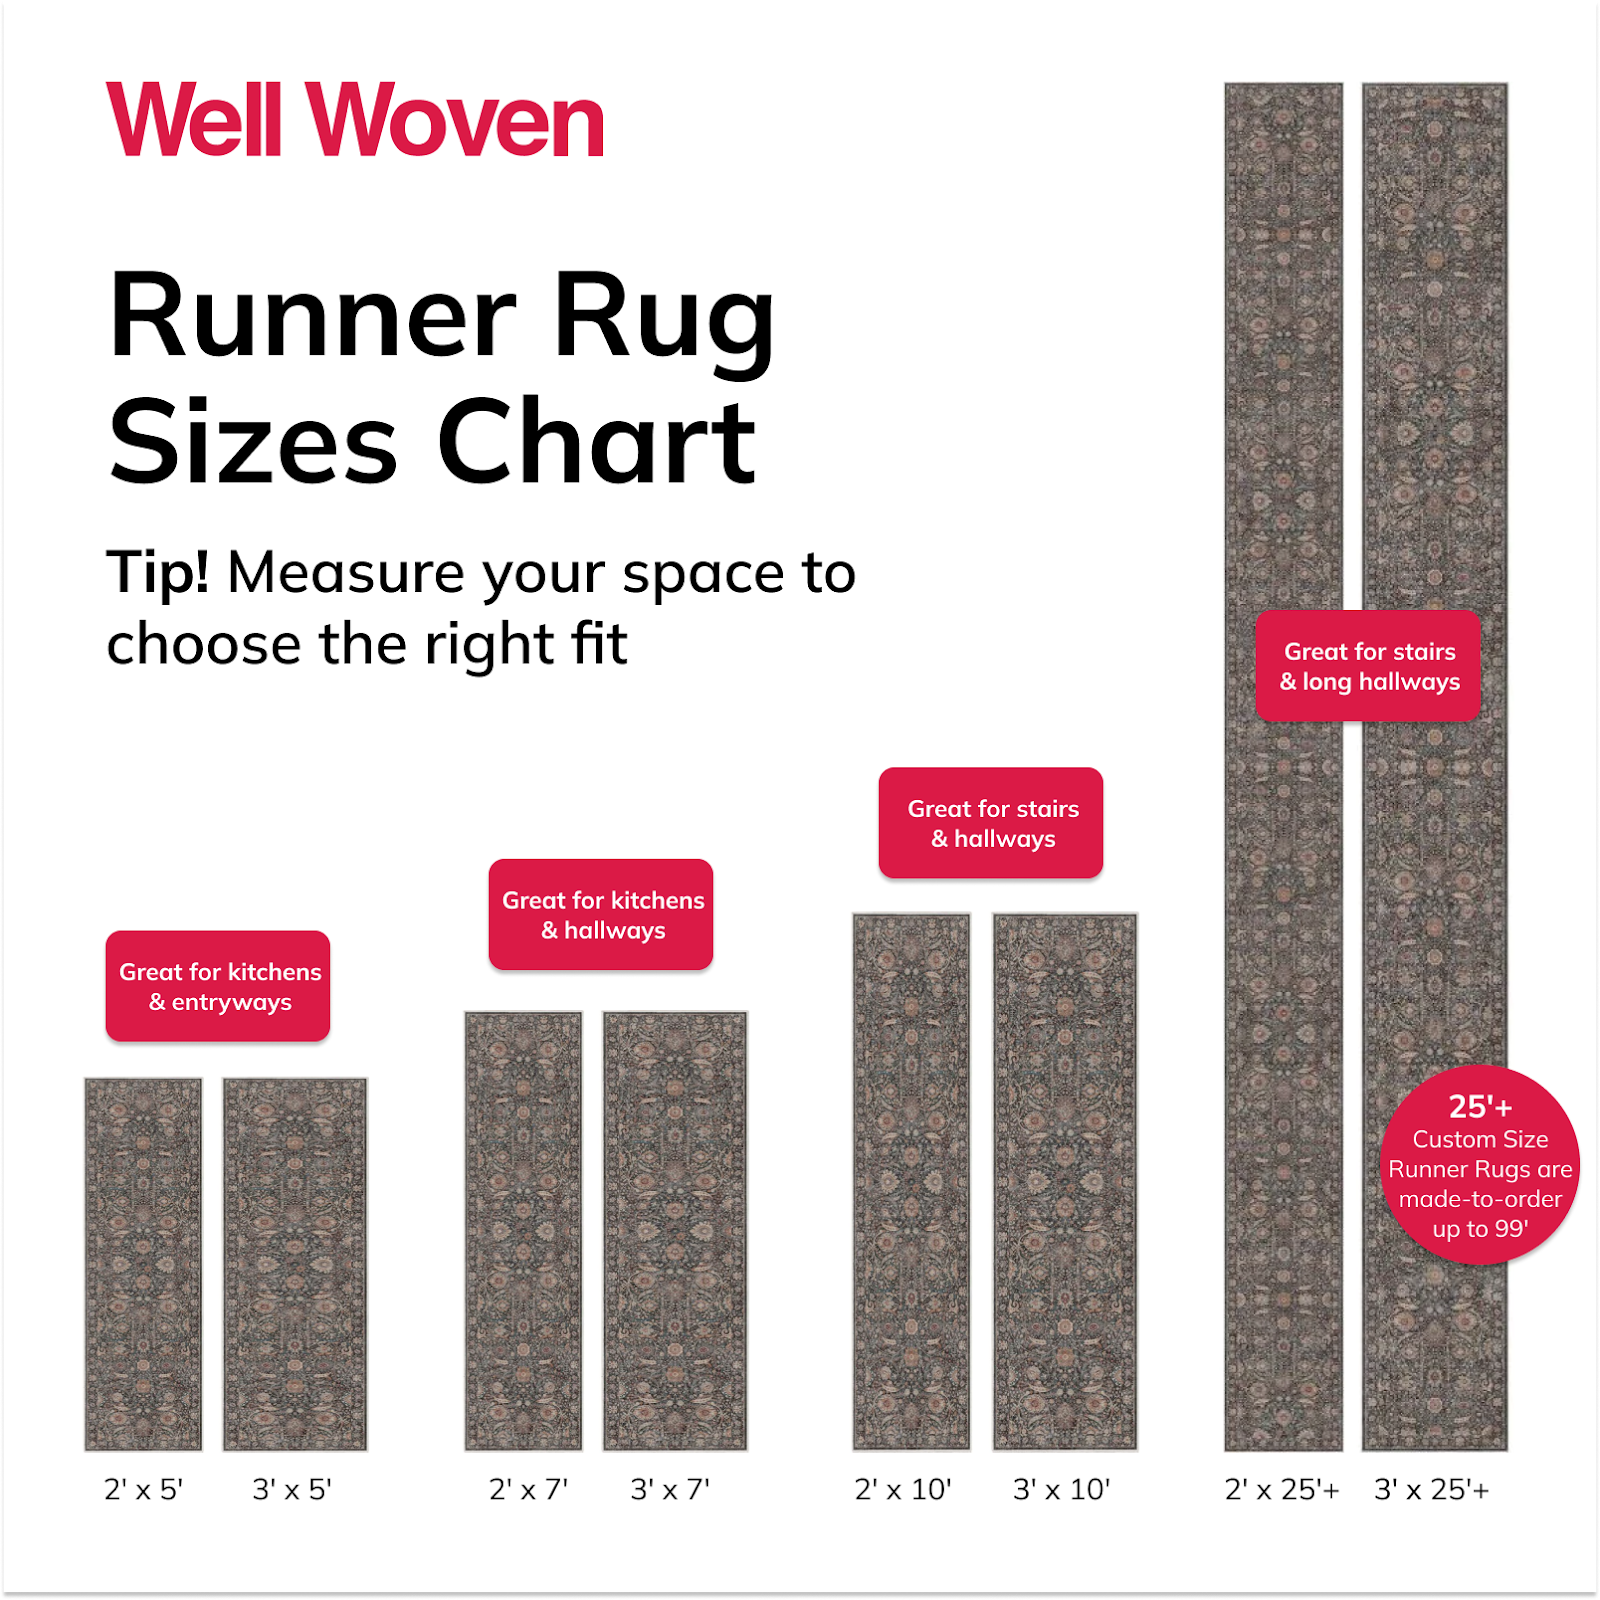 Measuring Up Tips For Selecting The Right Size Runner Rug